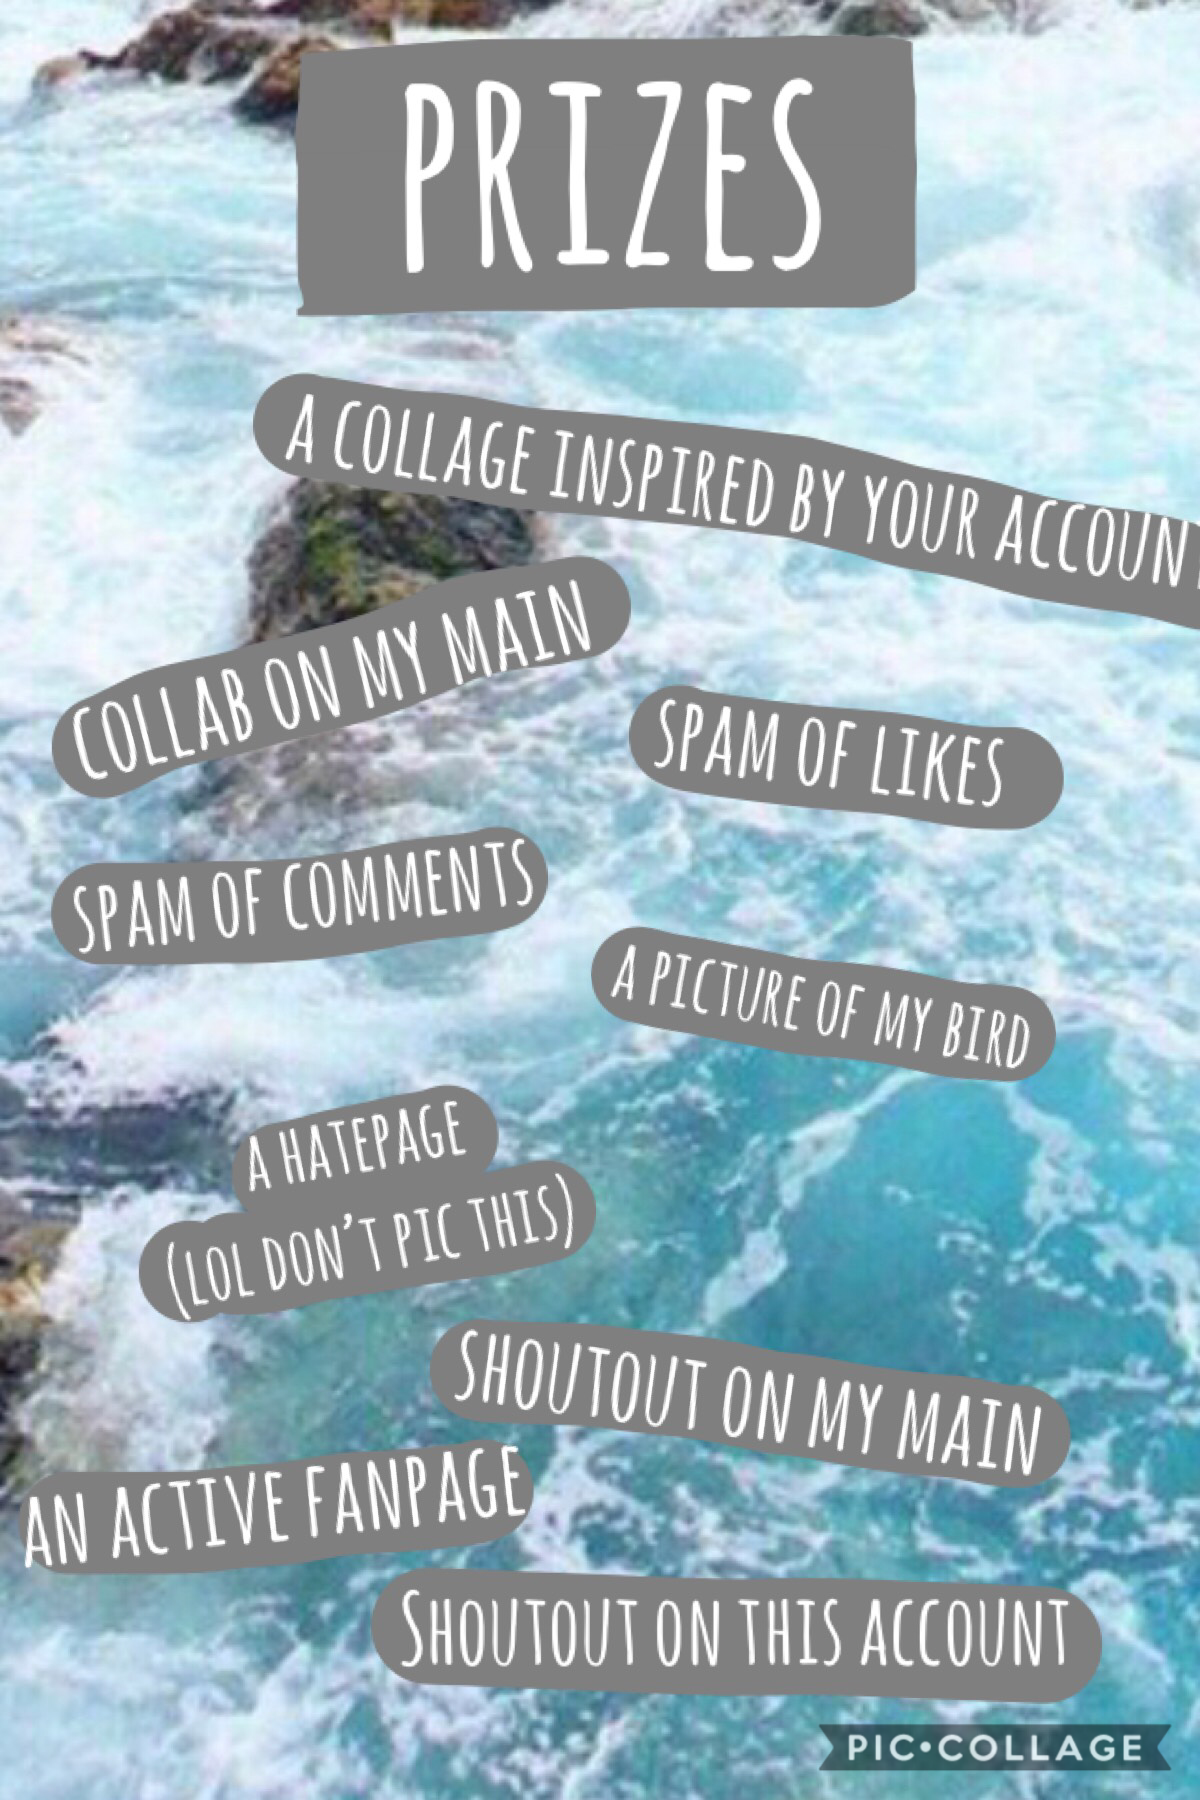 This is legit so low effort, tap ✌️
Don’t forget, contest deadline is tomorrow (the 27th) 🌟 how’s your day going? I’m tired, I gotta make a collage now uggghhh ttyl, love y’all who read all this 😘